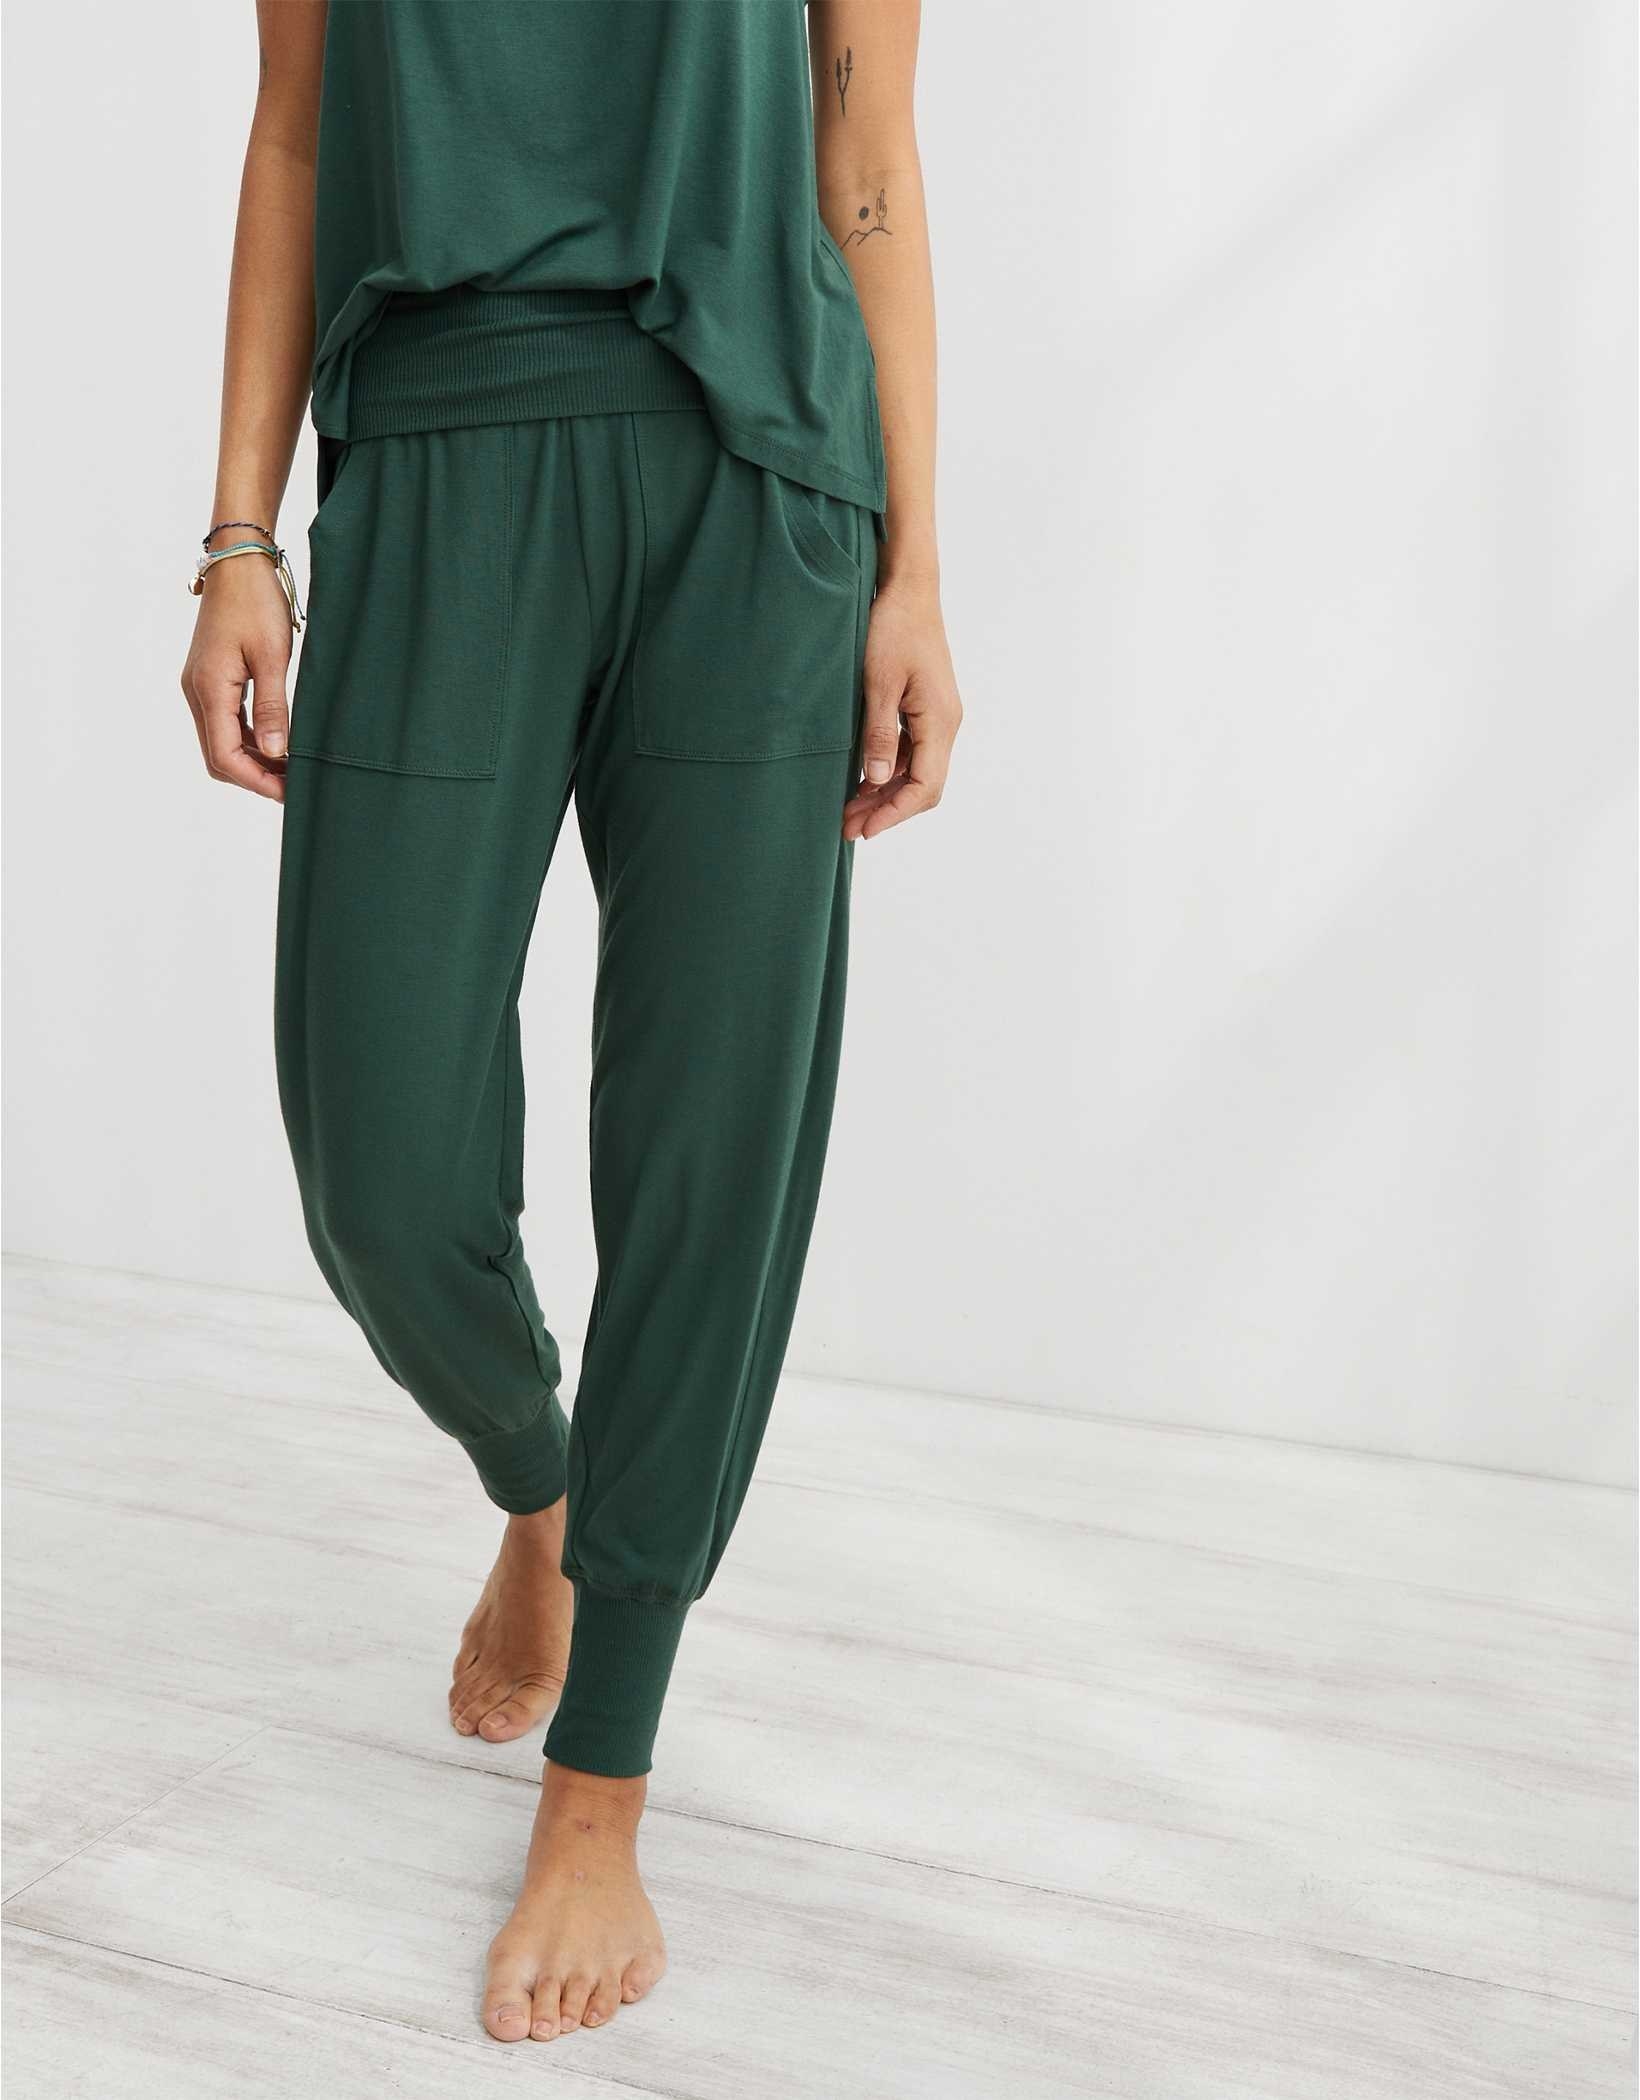 model in dark green drapey joggers with a folded waistband and thick ankle bands